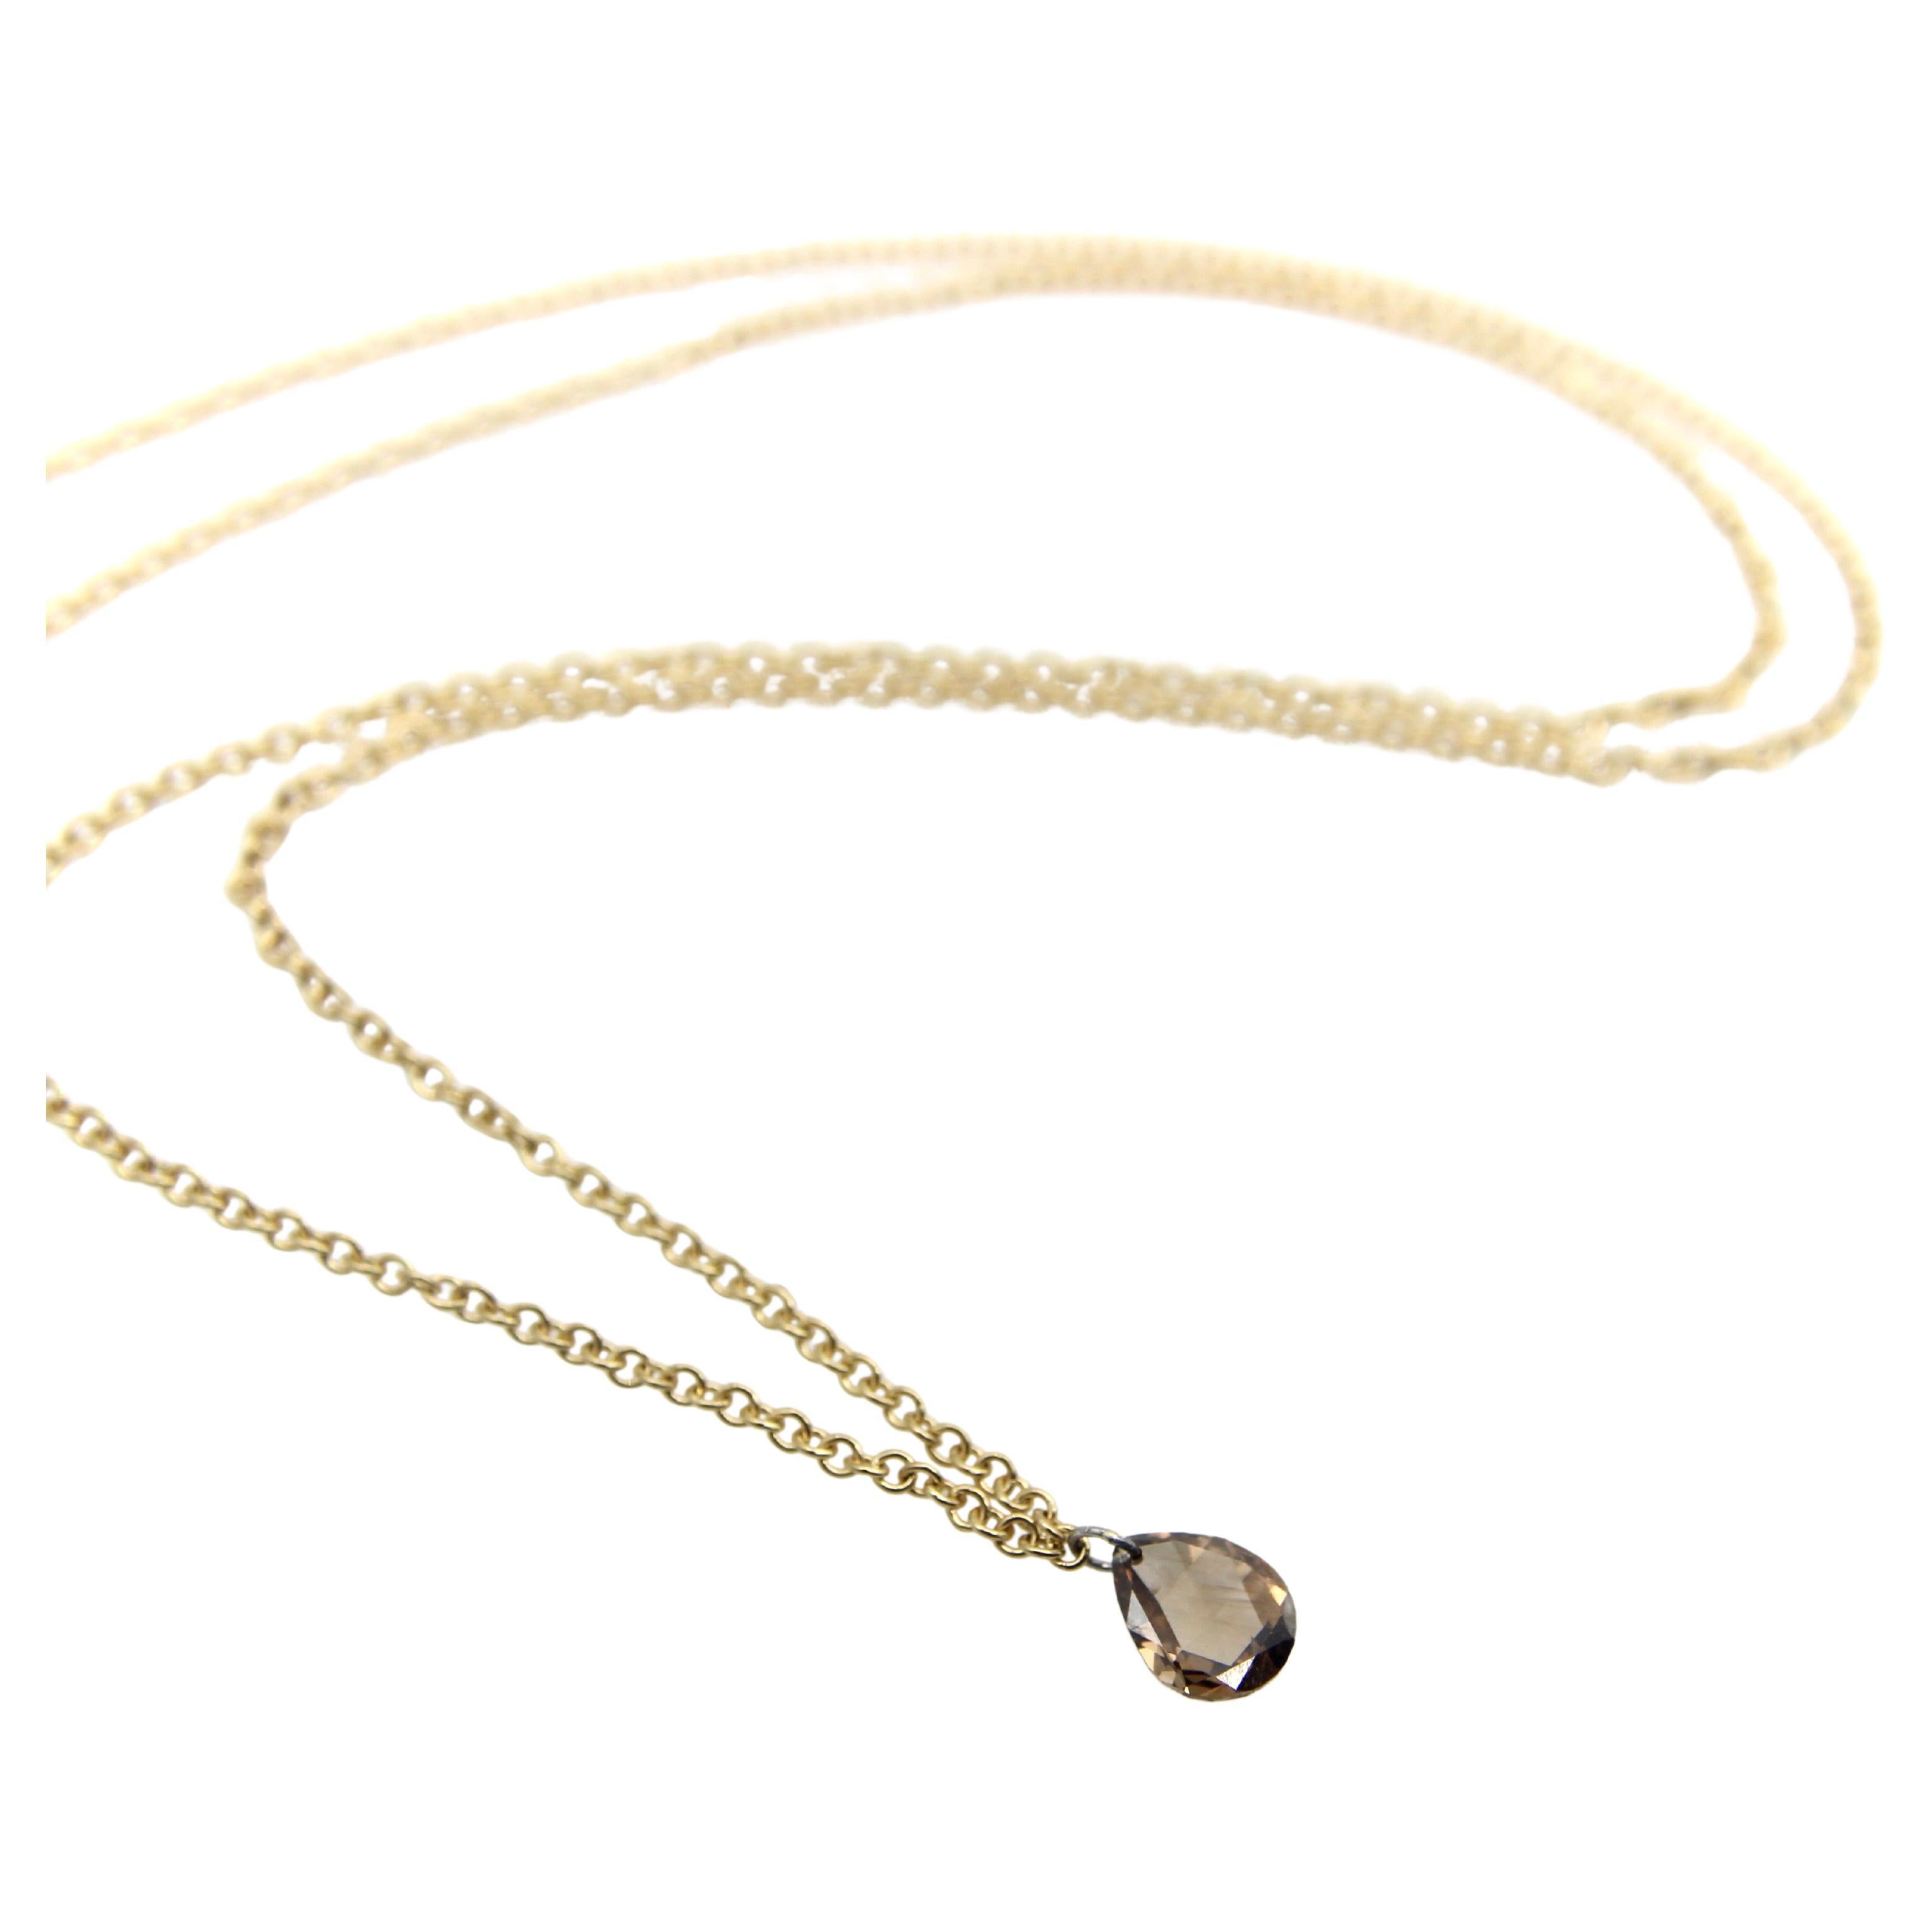 Pear Shaped Dangling Chocolate Rose Cut Diamond on 18K Gold Chain  For Sale